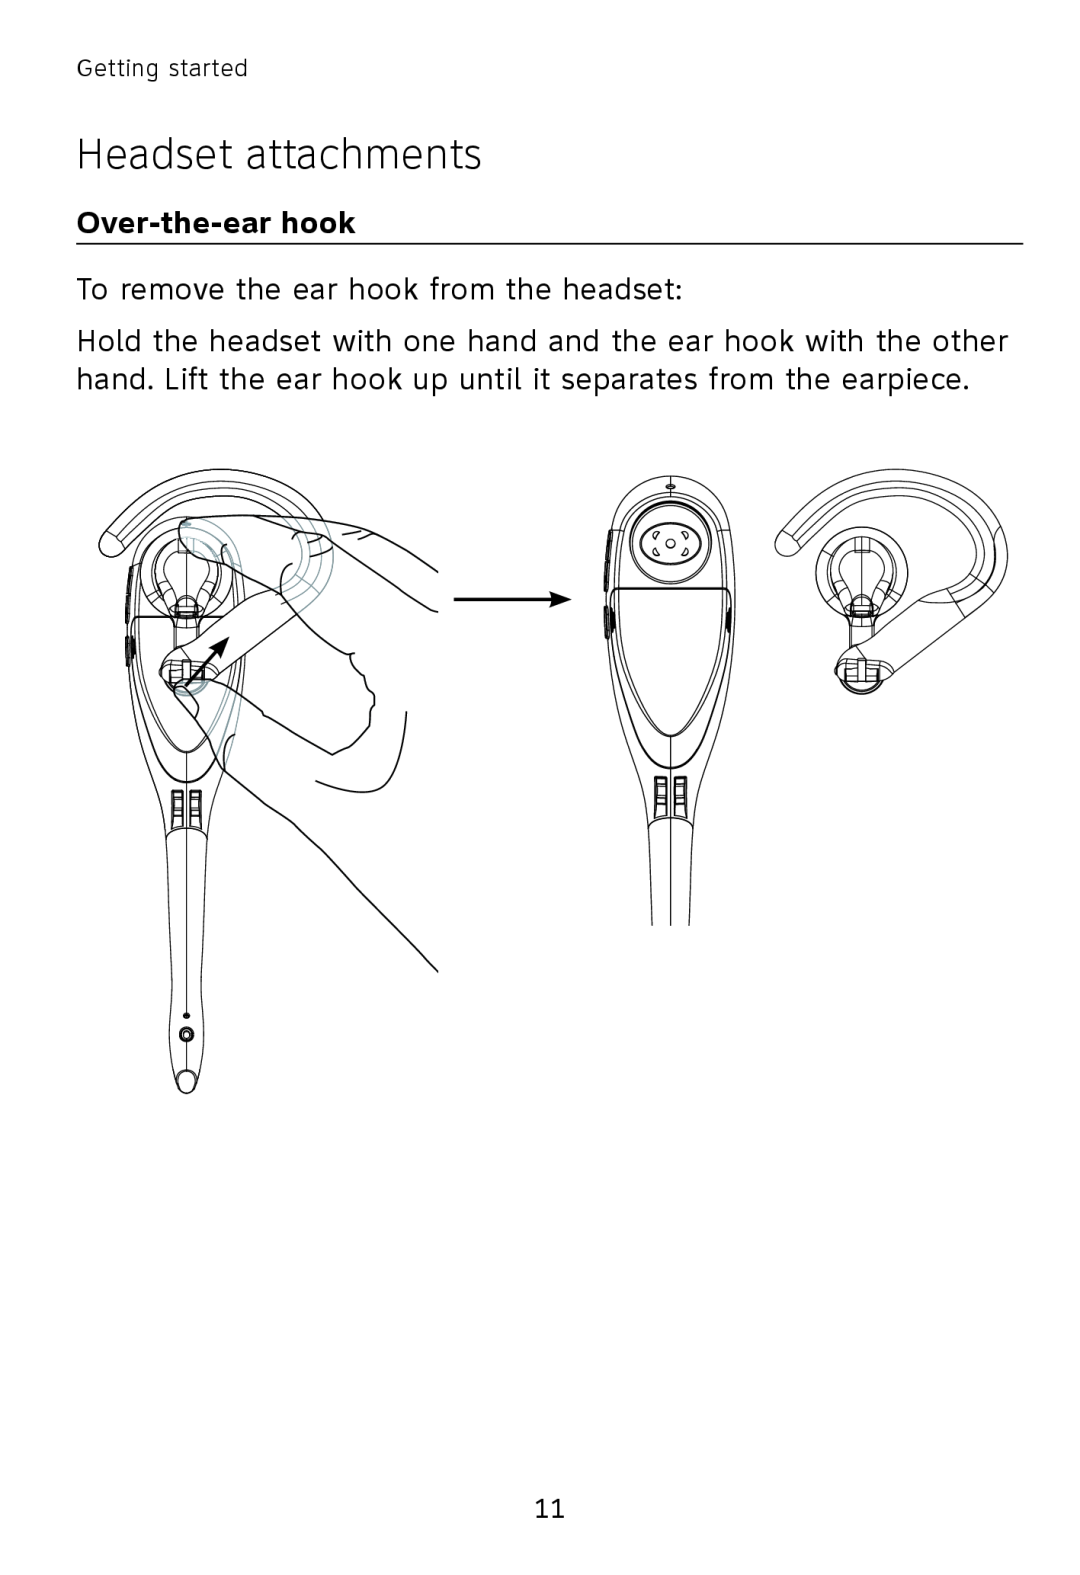 AT&T TL7600 user manual Headset attachments, To remove the ear hook from the headset 